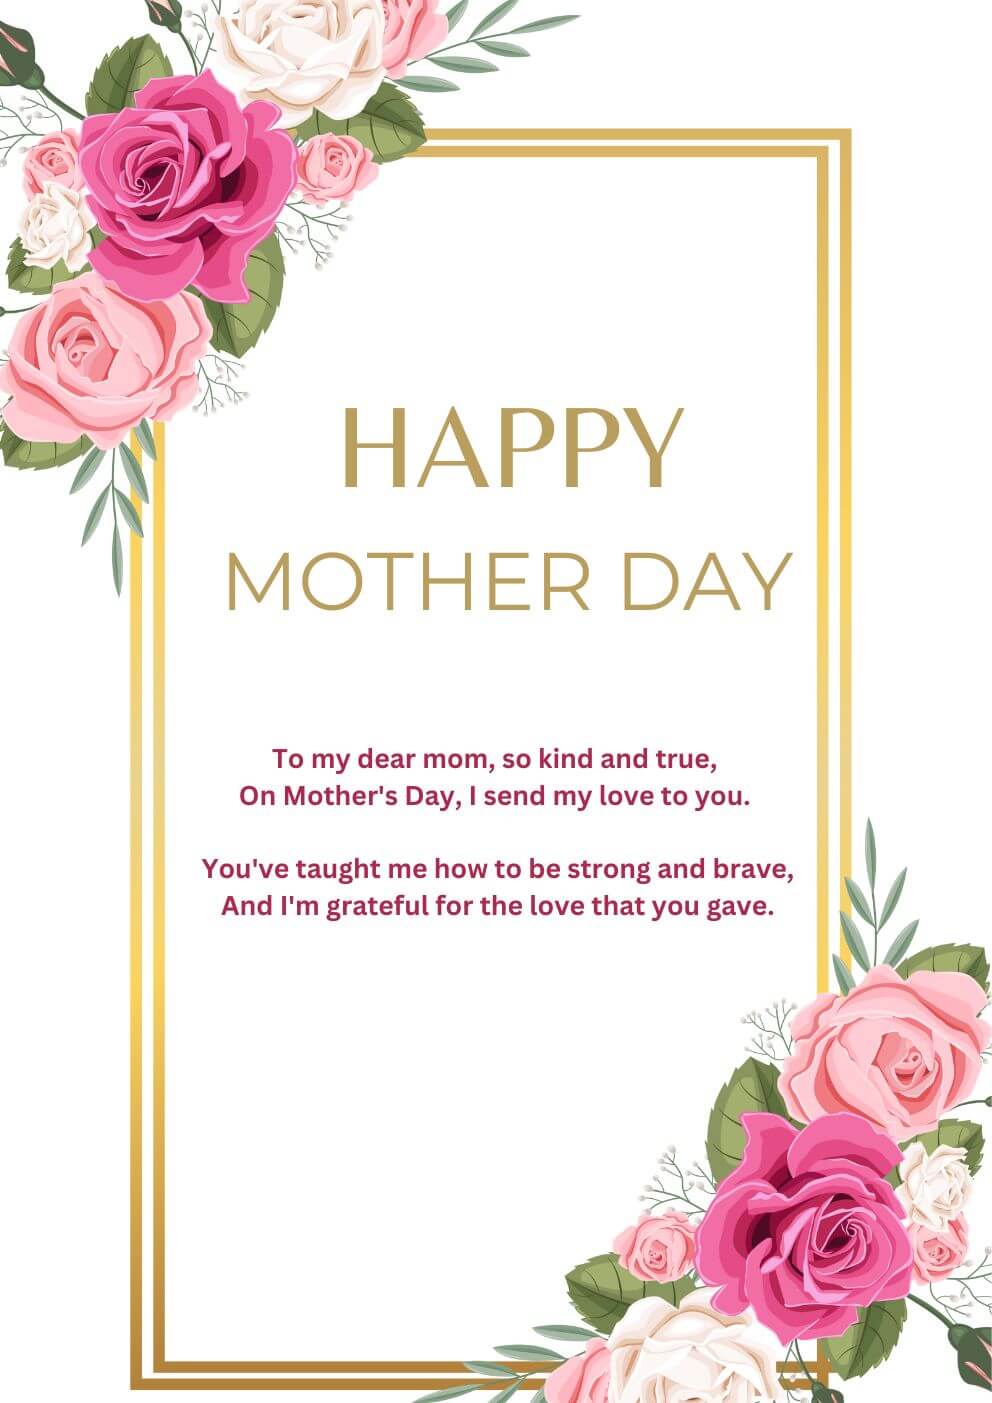 Cute Mothers Day Short Love Poem